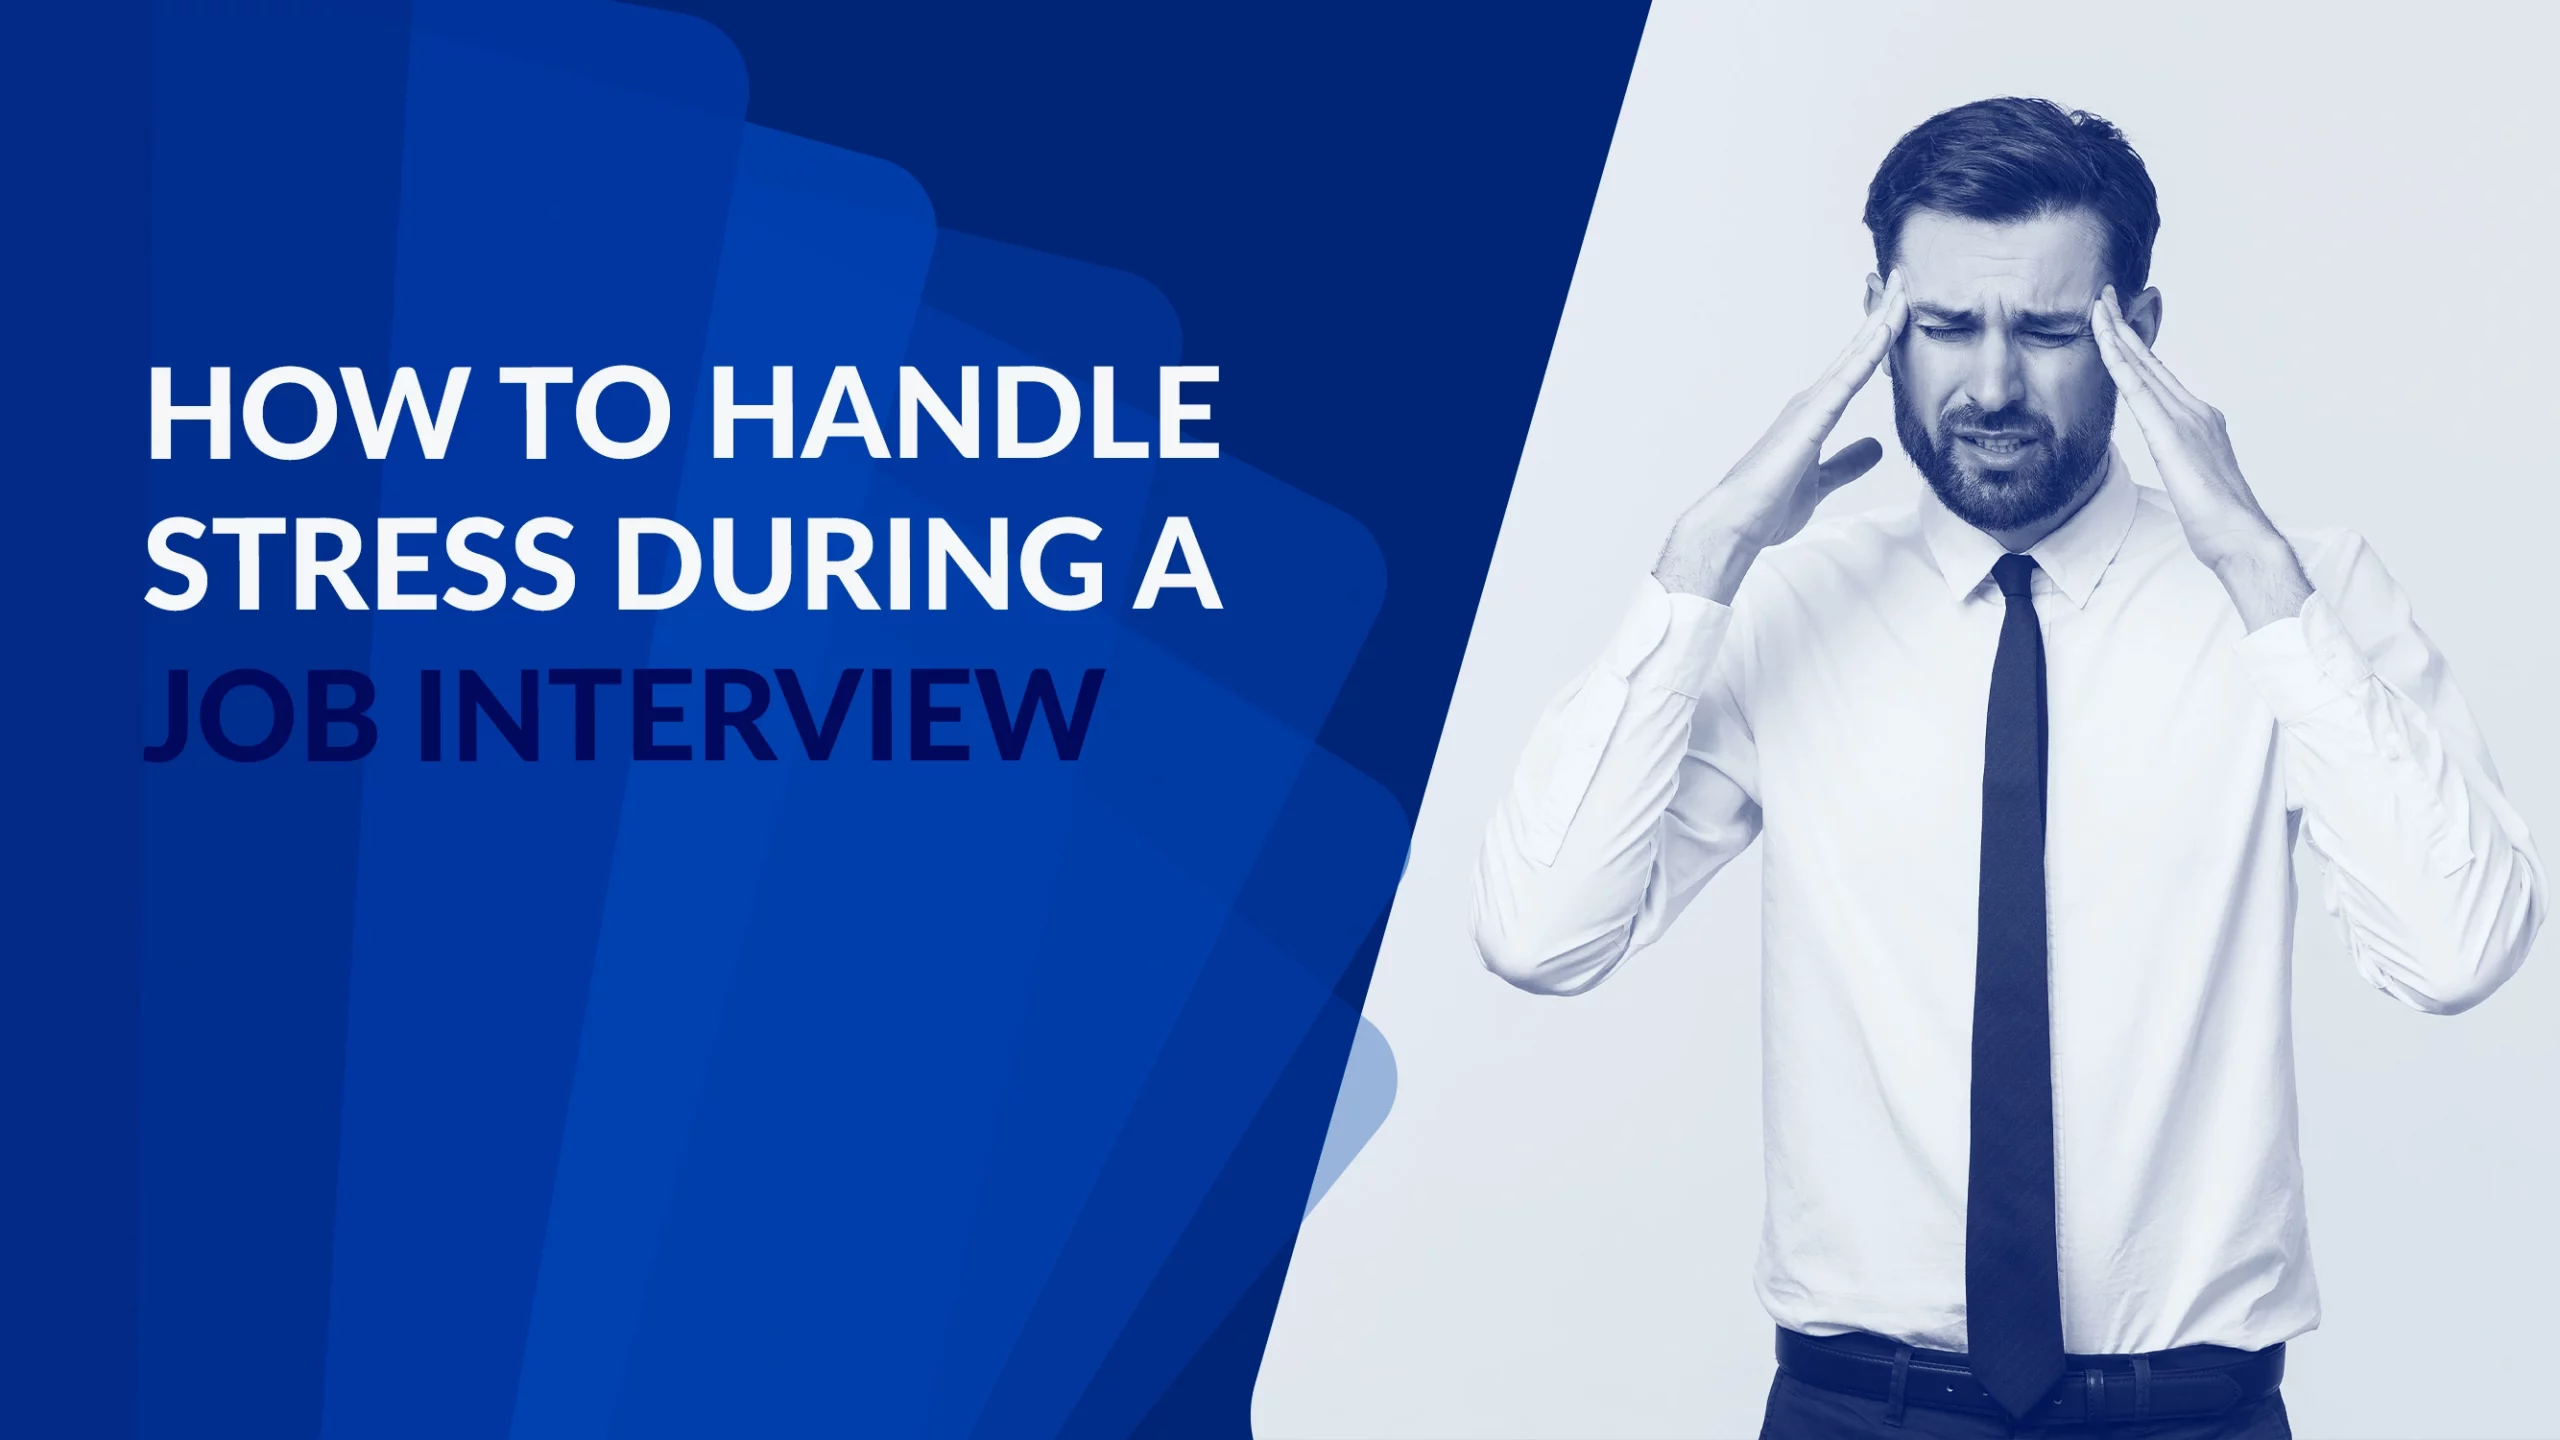 How to Handle Stress During a Job Interview